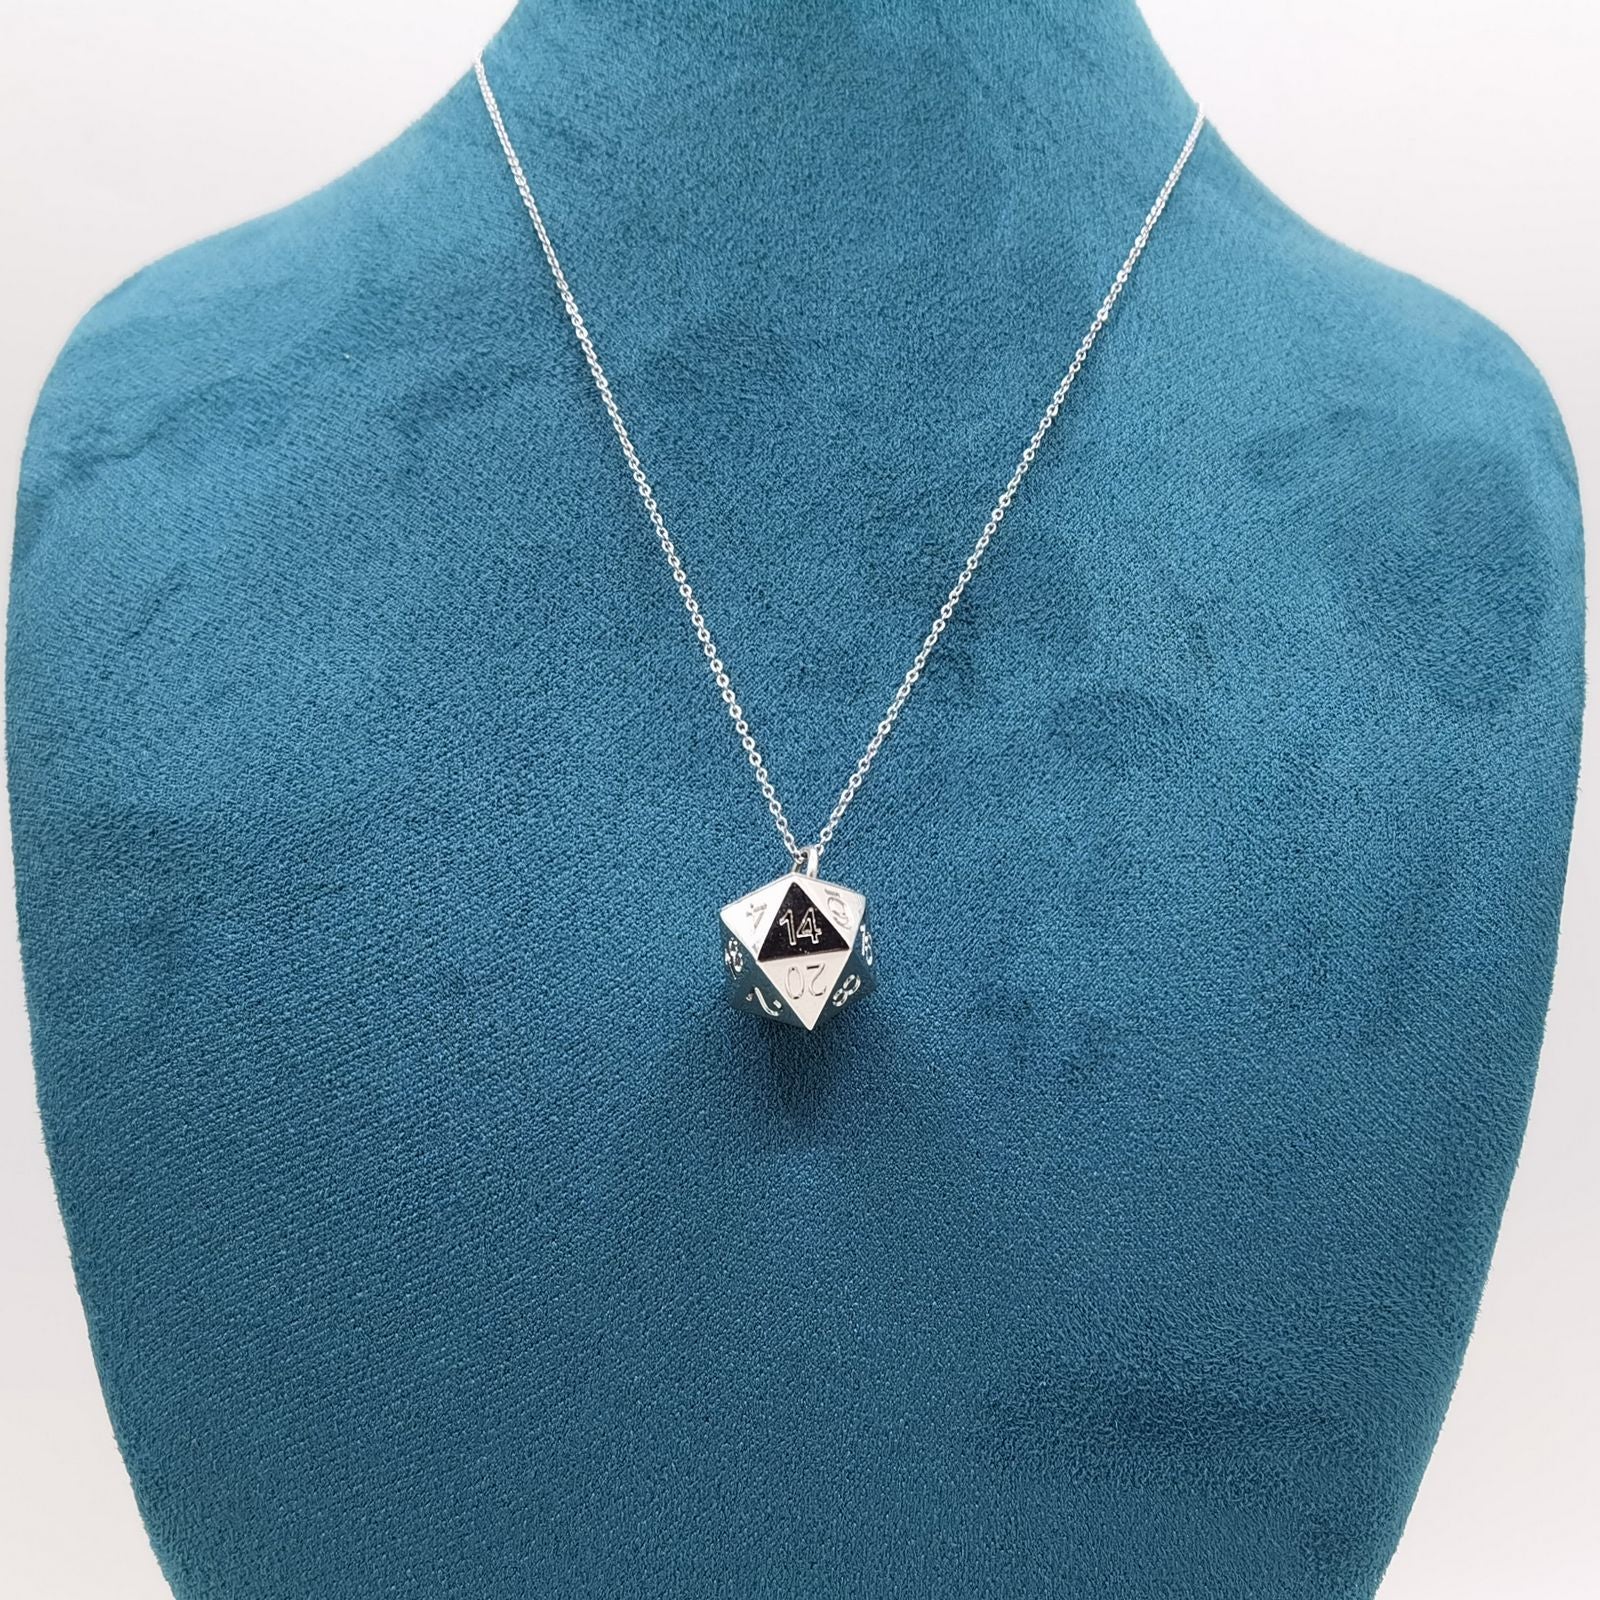 Stainless Steel Geometric Dice Necklace D20 Necklace Polyhedral Dice Charm Necklace  Dice Jewelry Dungeons and Dragons Necklace 